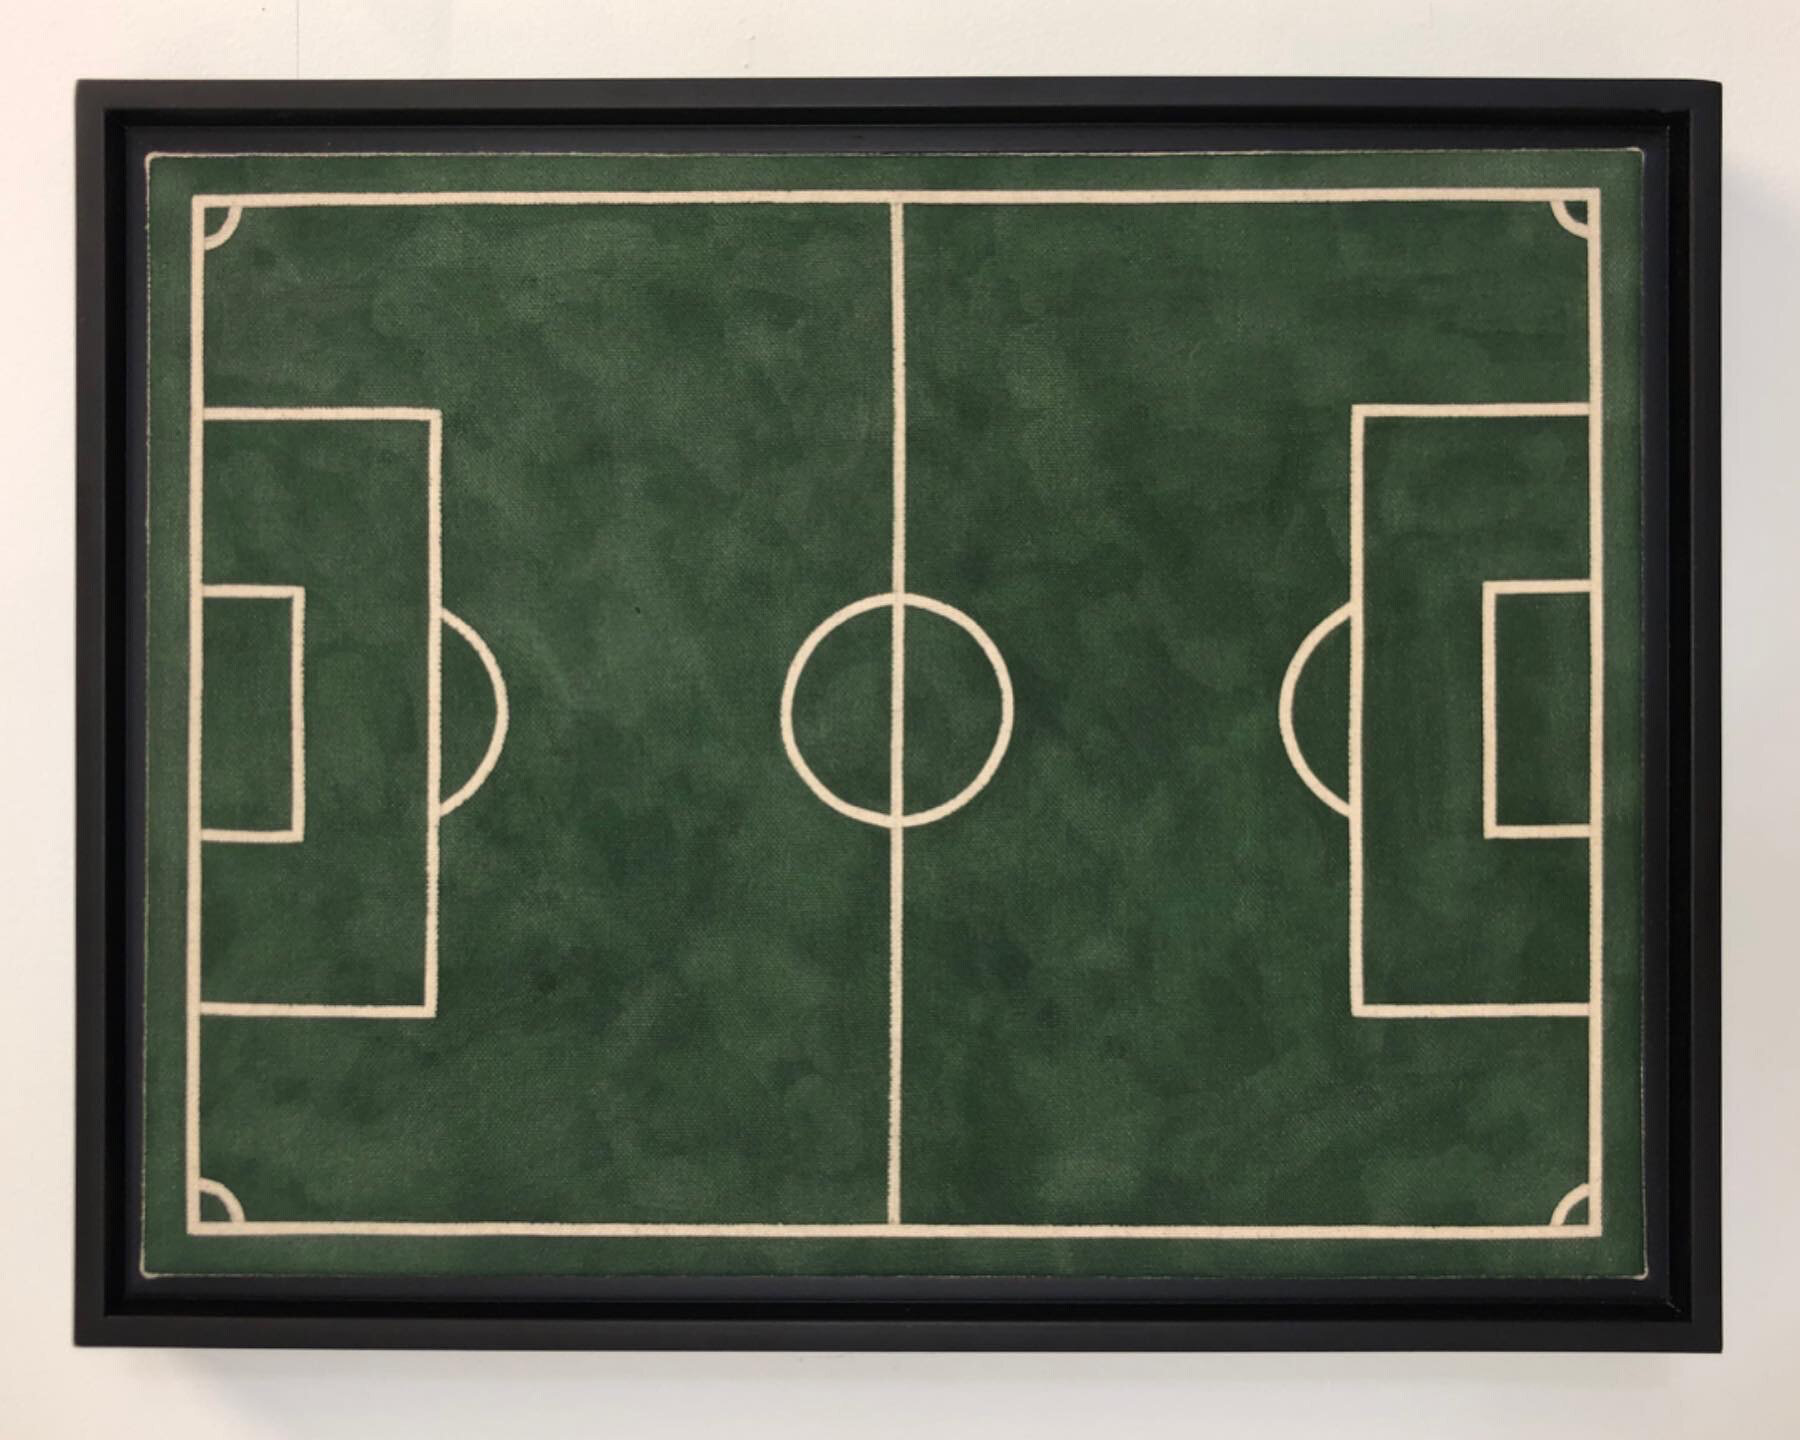   The Beautiful Game (for Dad) (and Raoul de Keyser),  2020 Acrylic stain on canvas 12 x 16 inches (30cm x 40cm) 